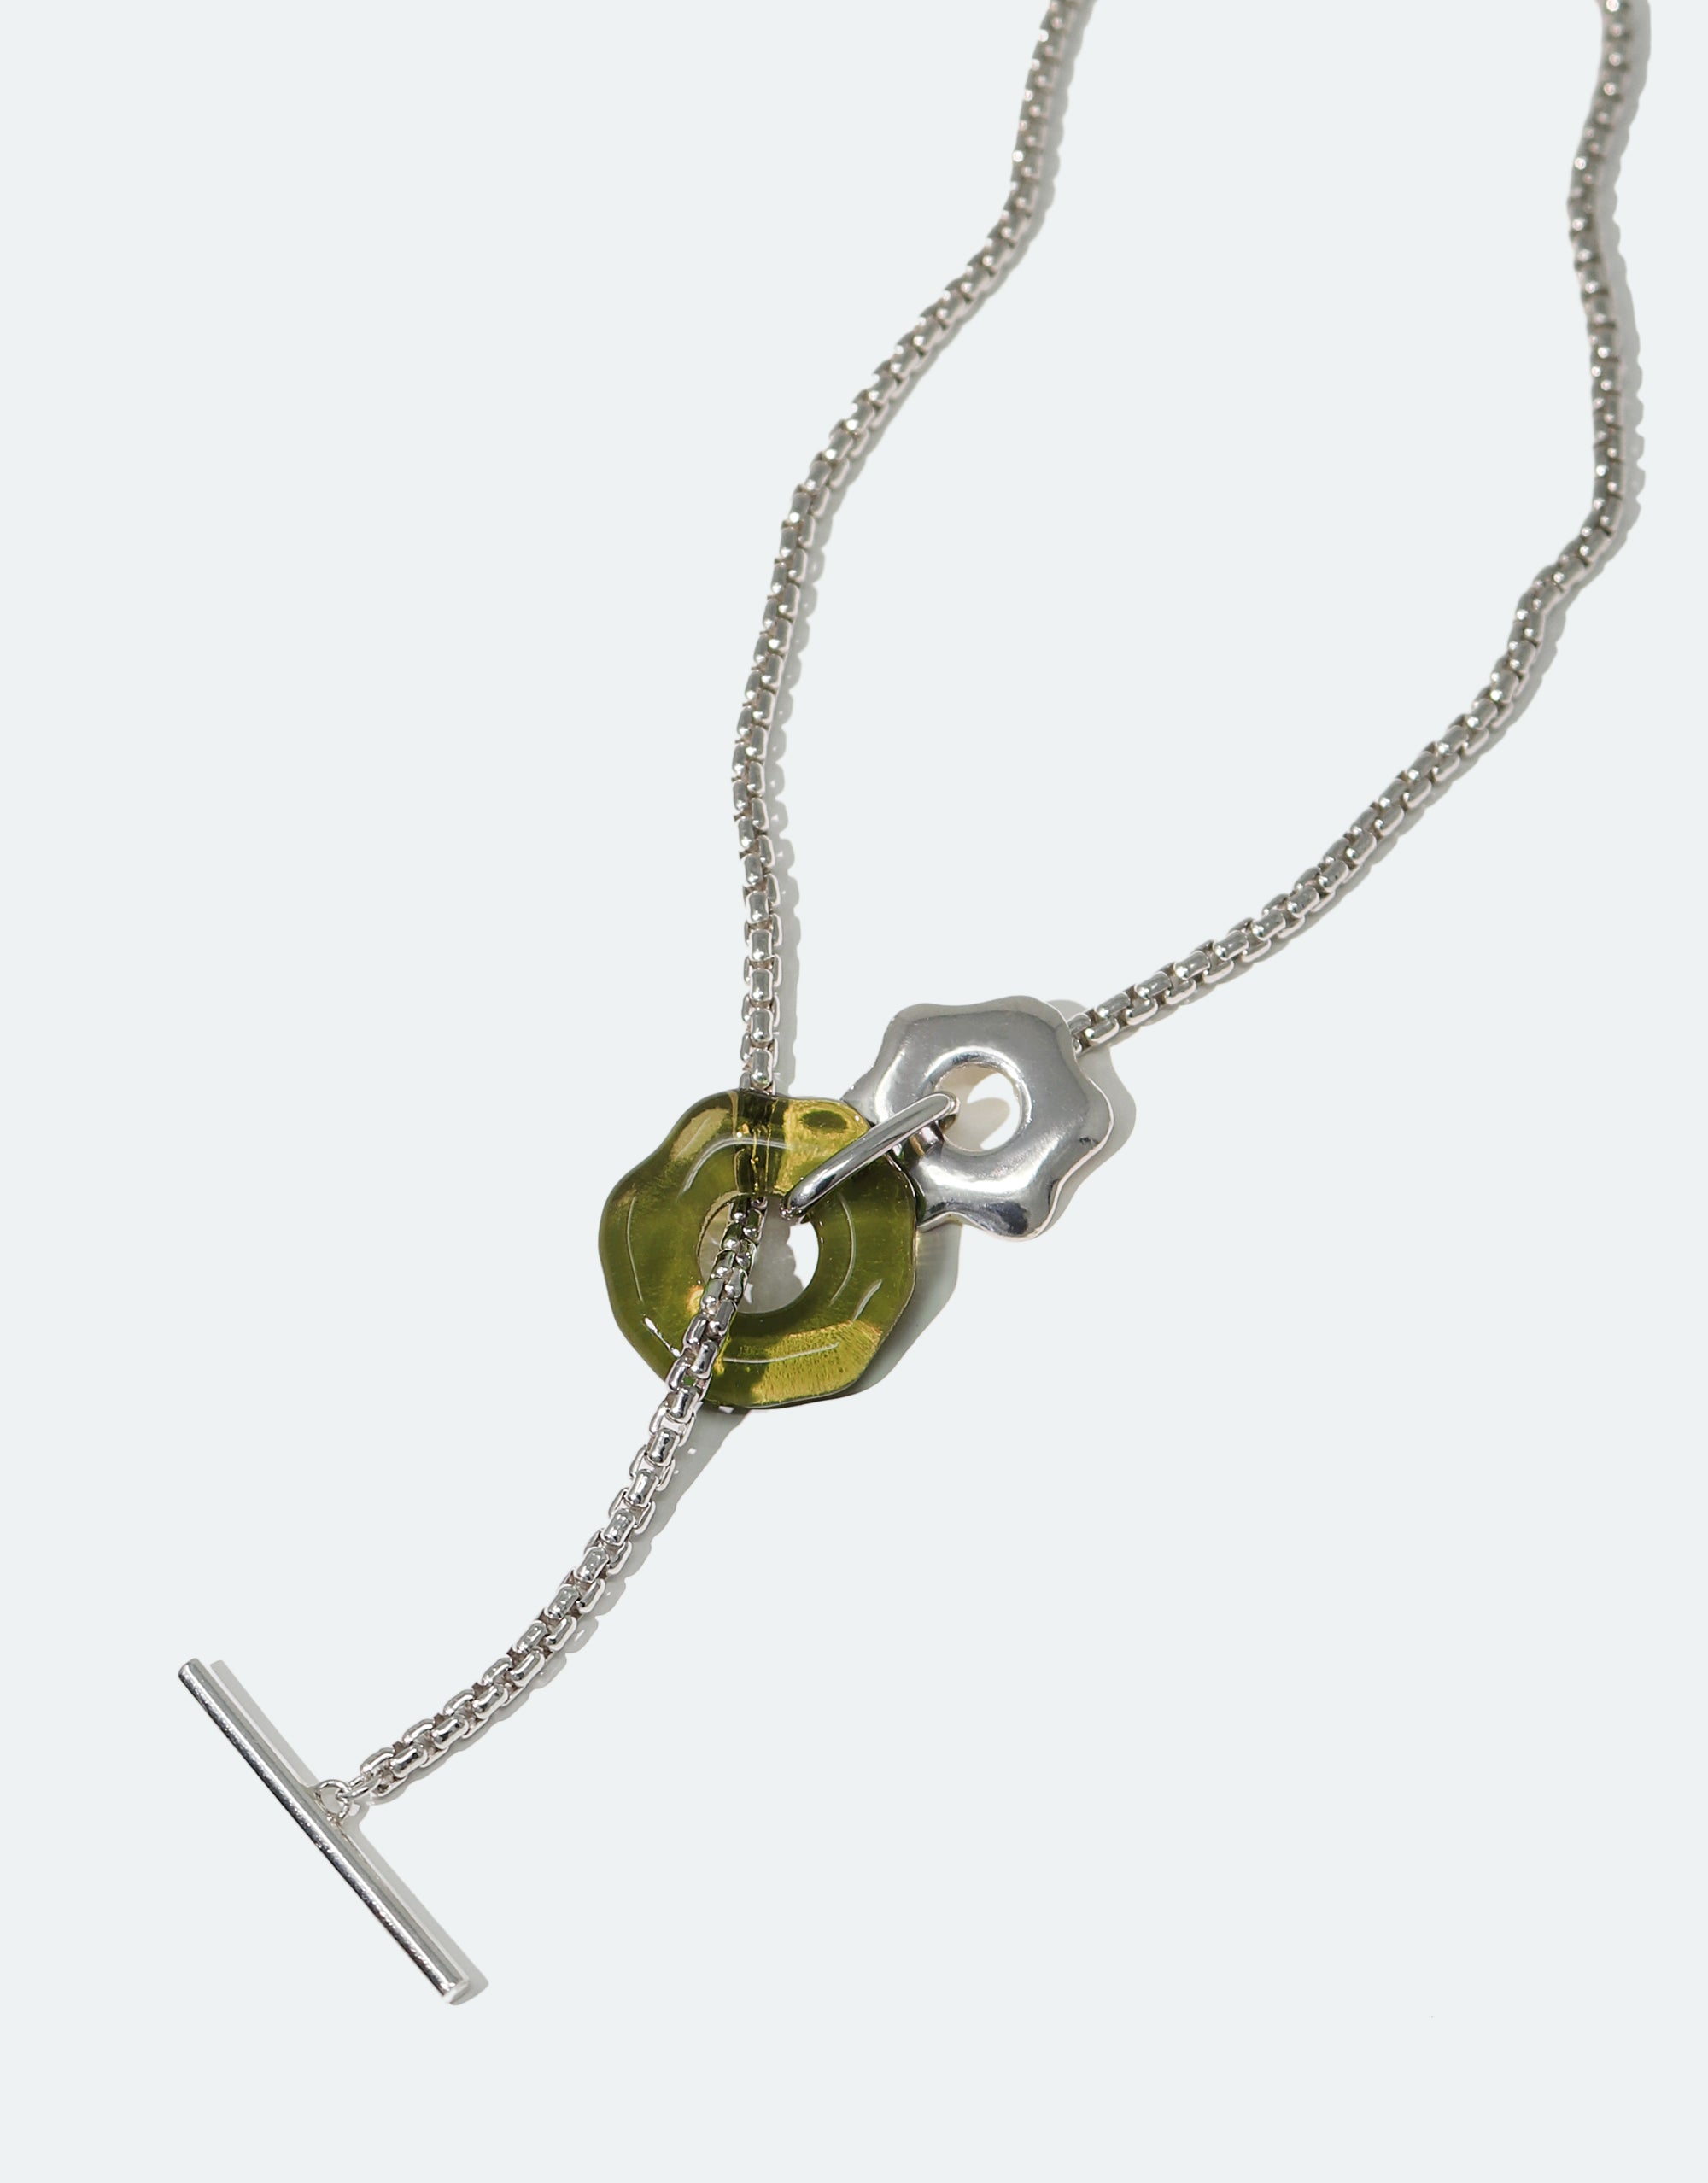 CLED Eco Conscious Sustainable upcycled jewelry made from Eco Gems and sterling silver from recycled glass | Avens Toggle Necklace